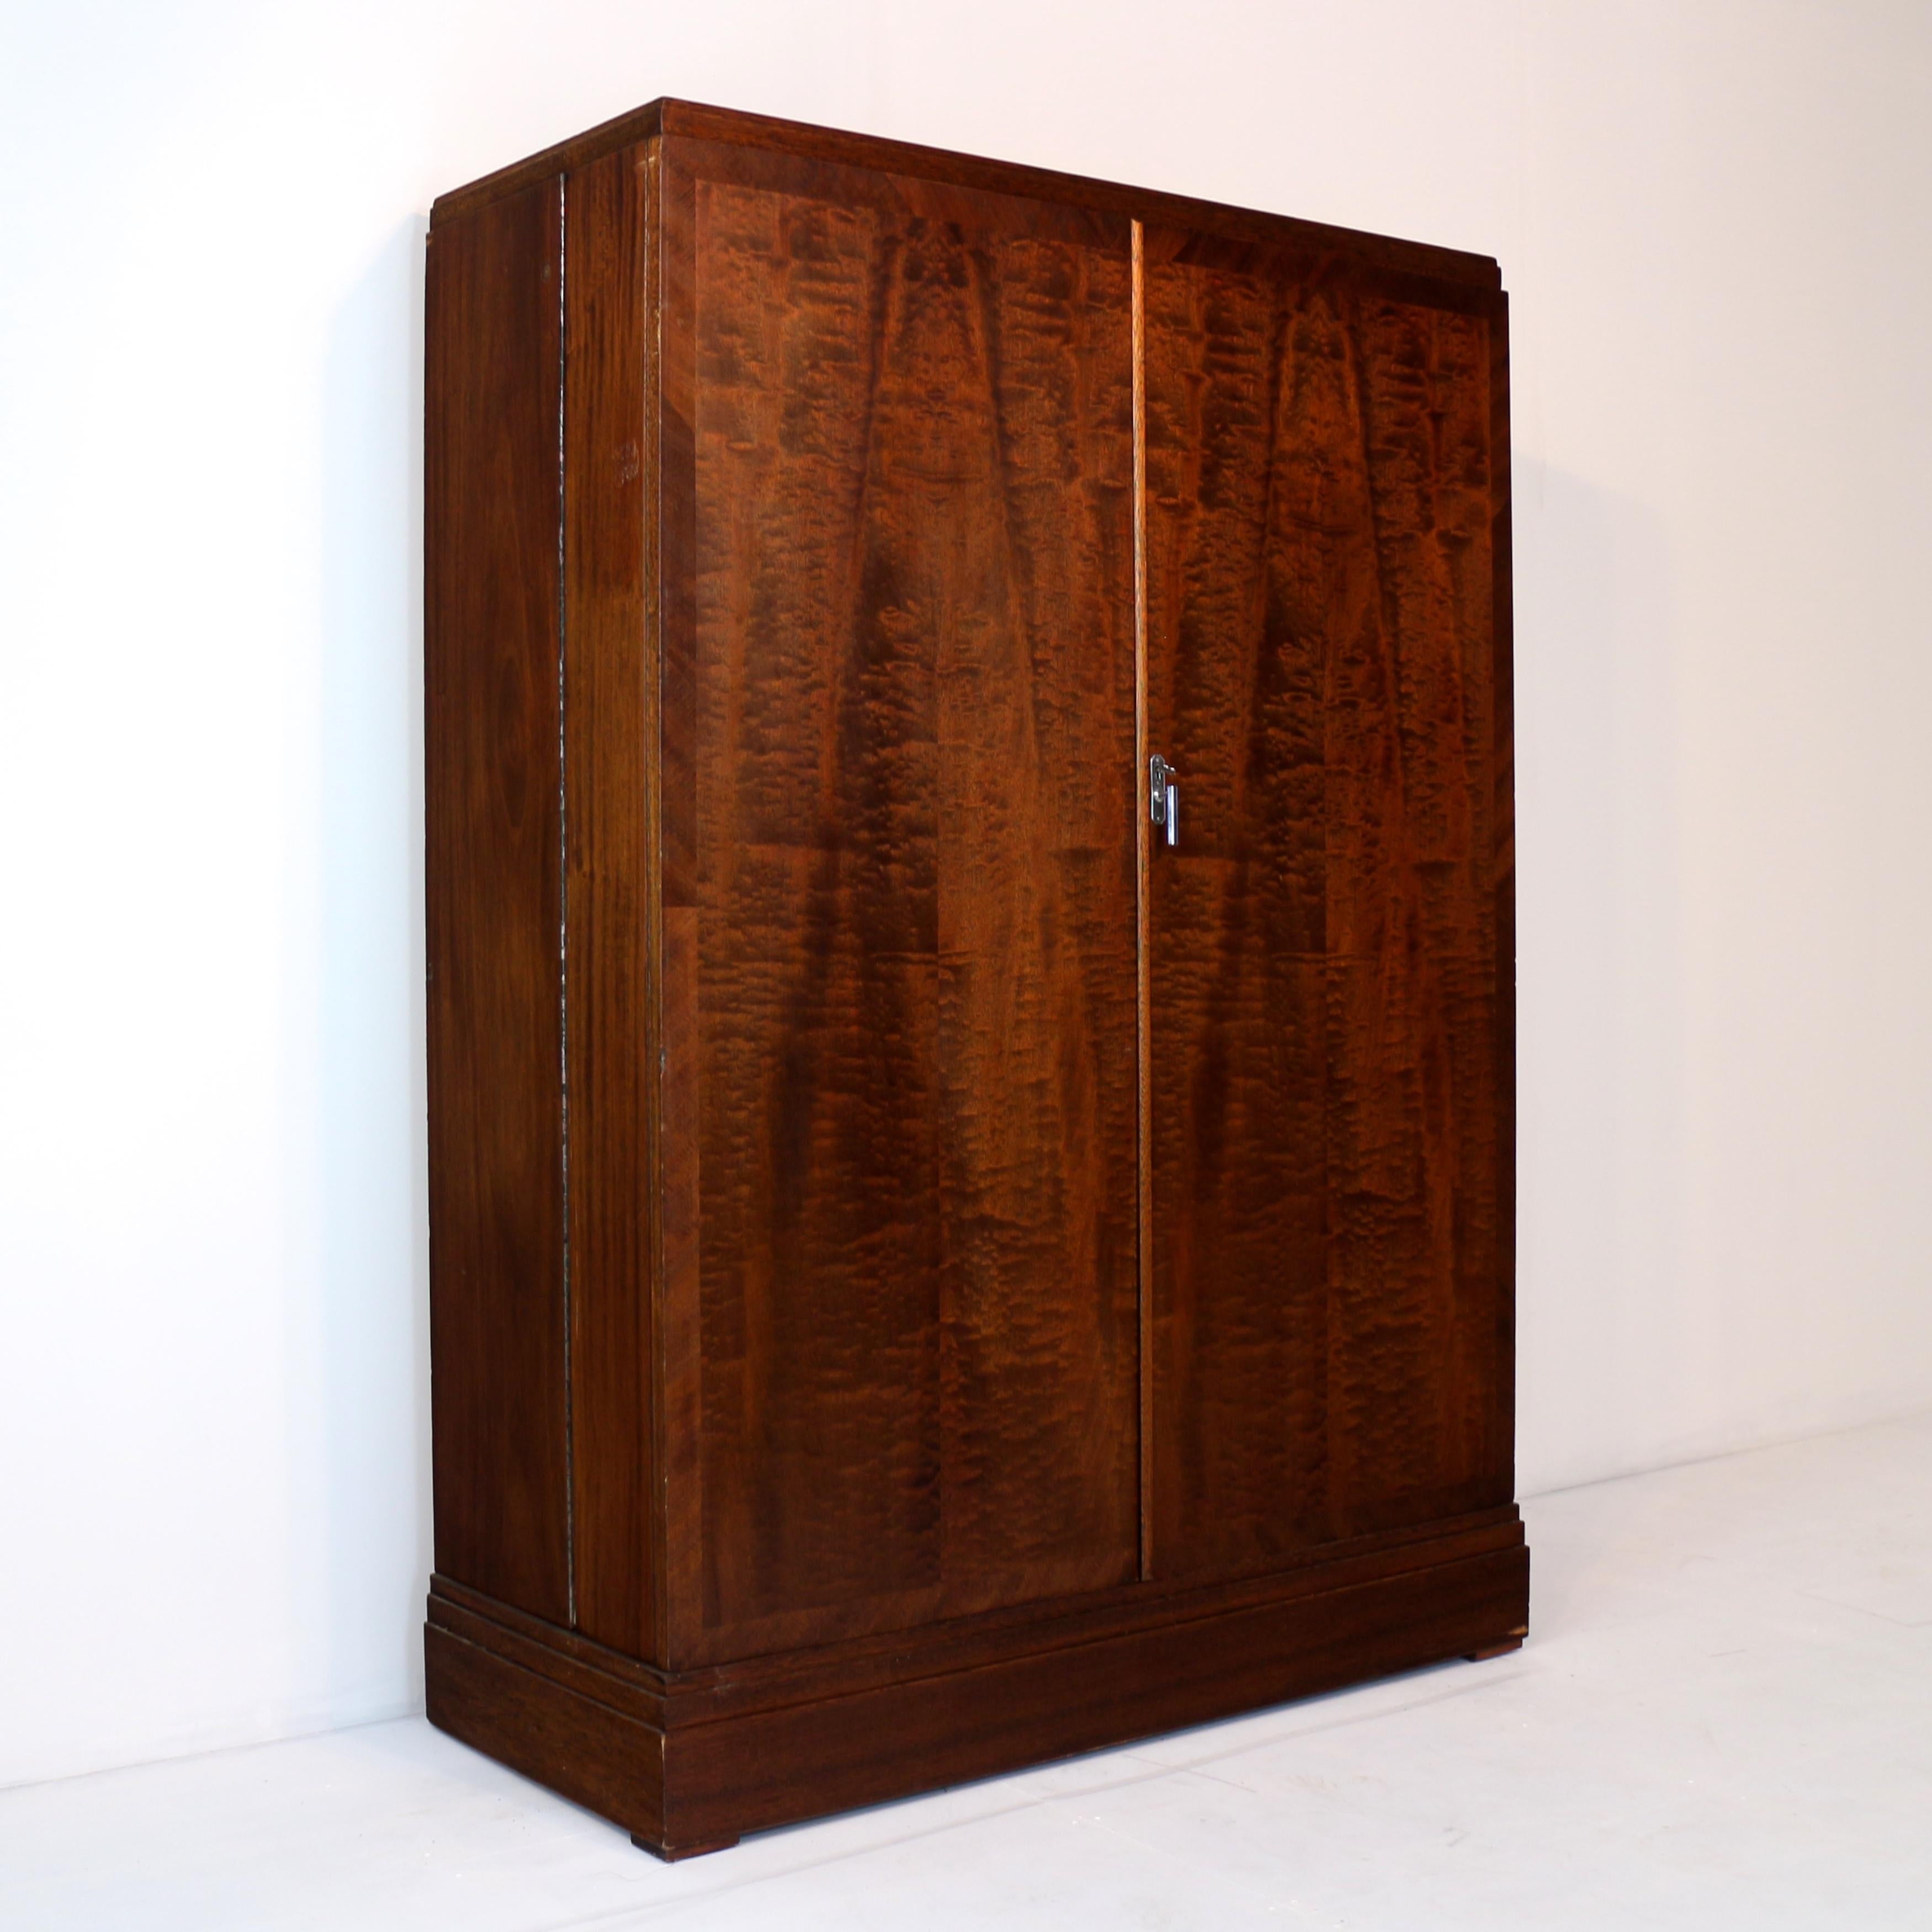 A stunning early 20th century original gentleman’s ‘YN’ model mahogany wardrobe by Compactom Ltd of London dating to circa 1920. This iconic British made and designed wardrobe is in good condition with original fittings and labels to the drawers and